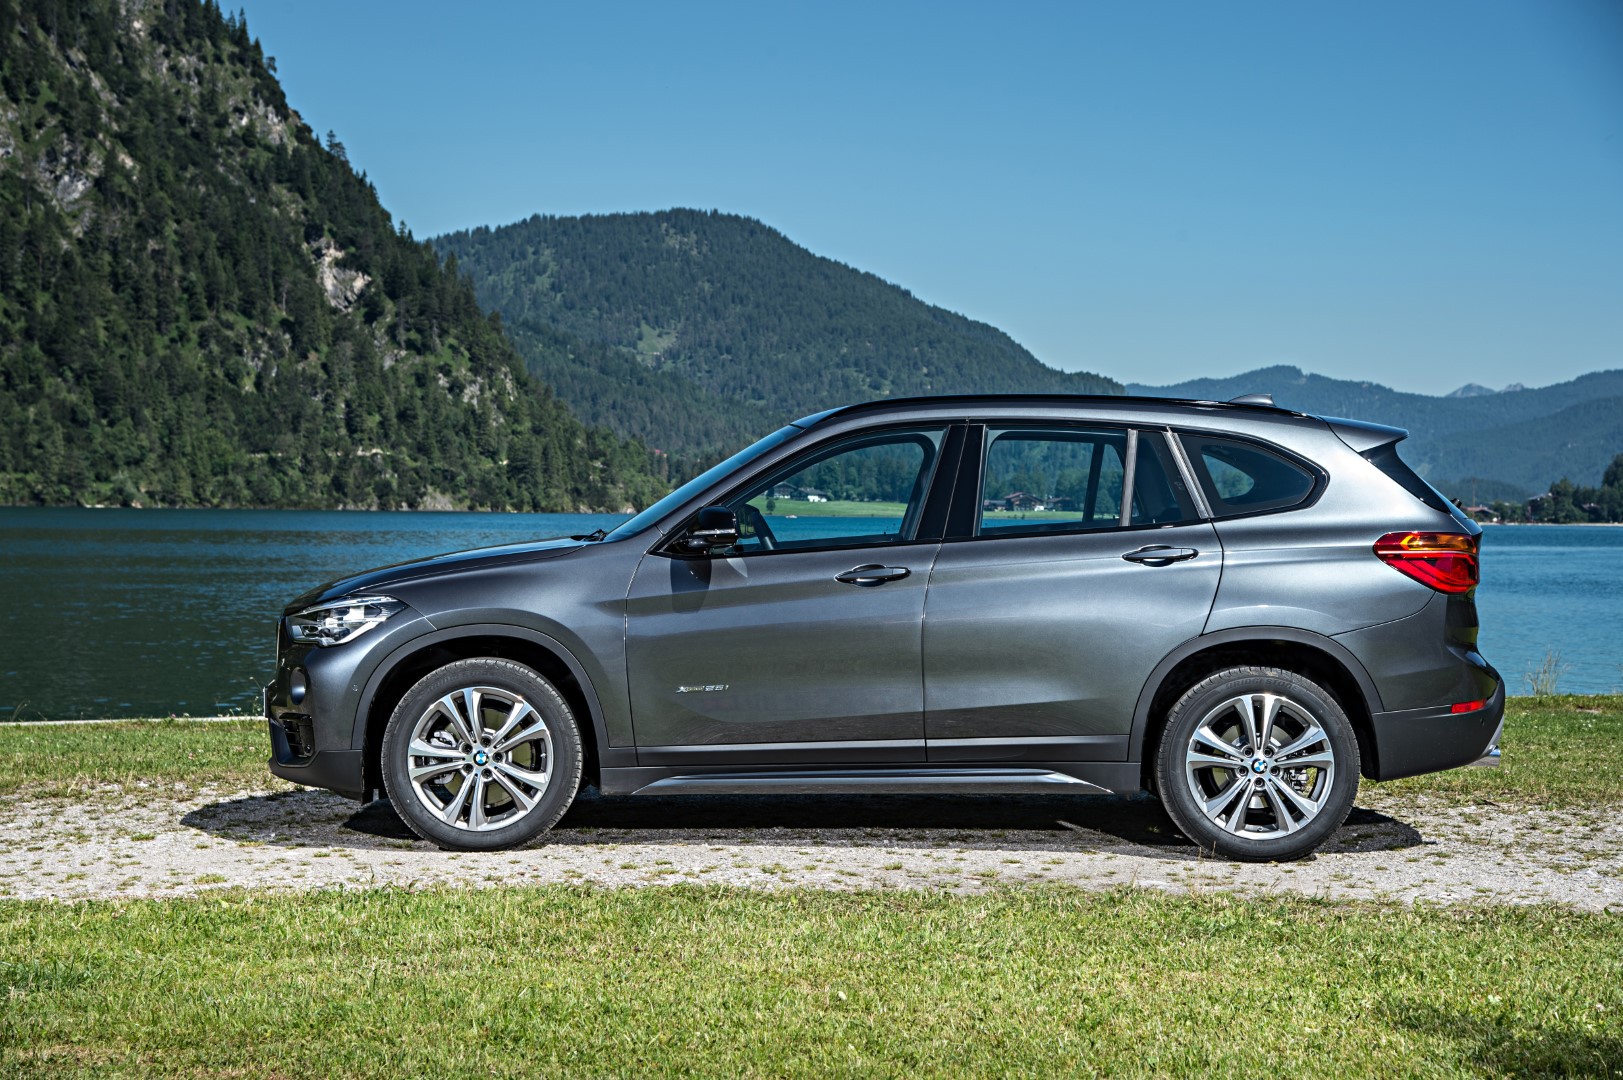 1554707771P90190753-highRes-the-new-bmw-x1-on-lo.jpg